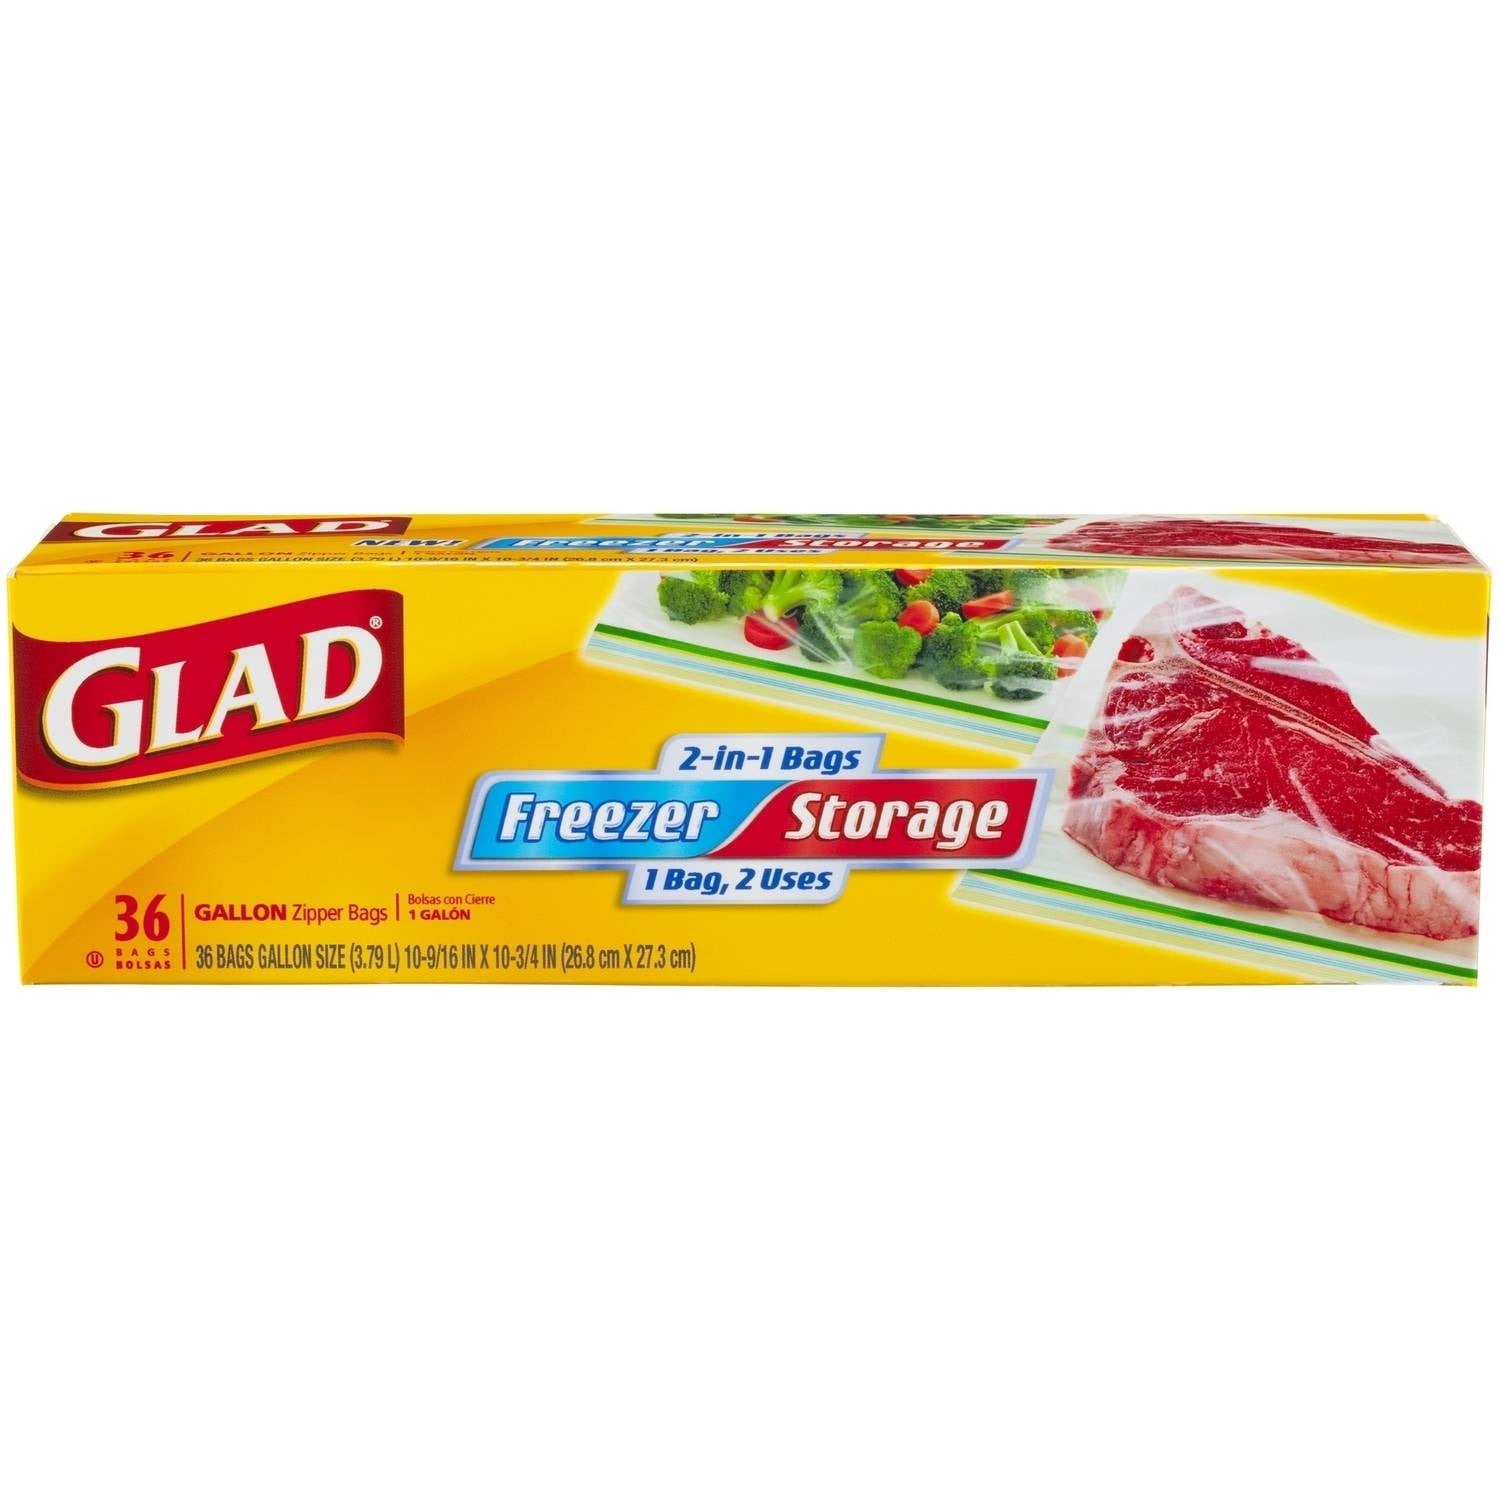 Glad Food Storage Zipper Bags (Gallon), 40-Count Box, Size: One Size